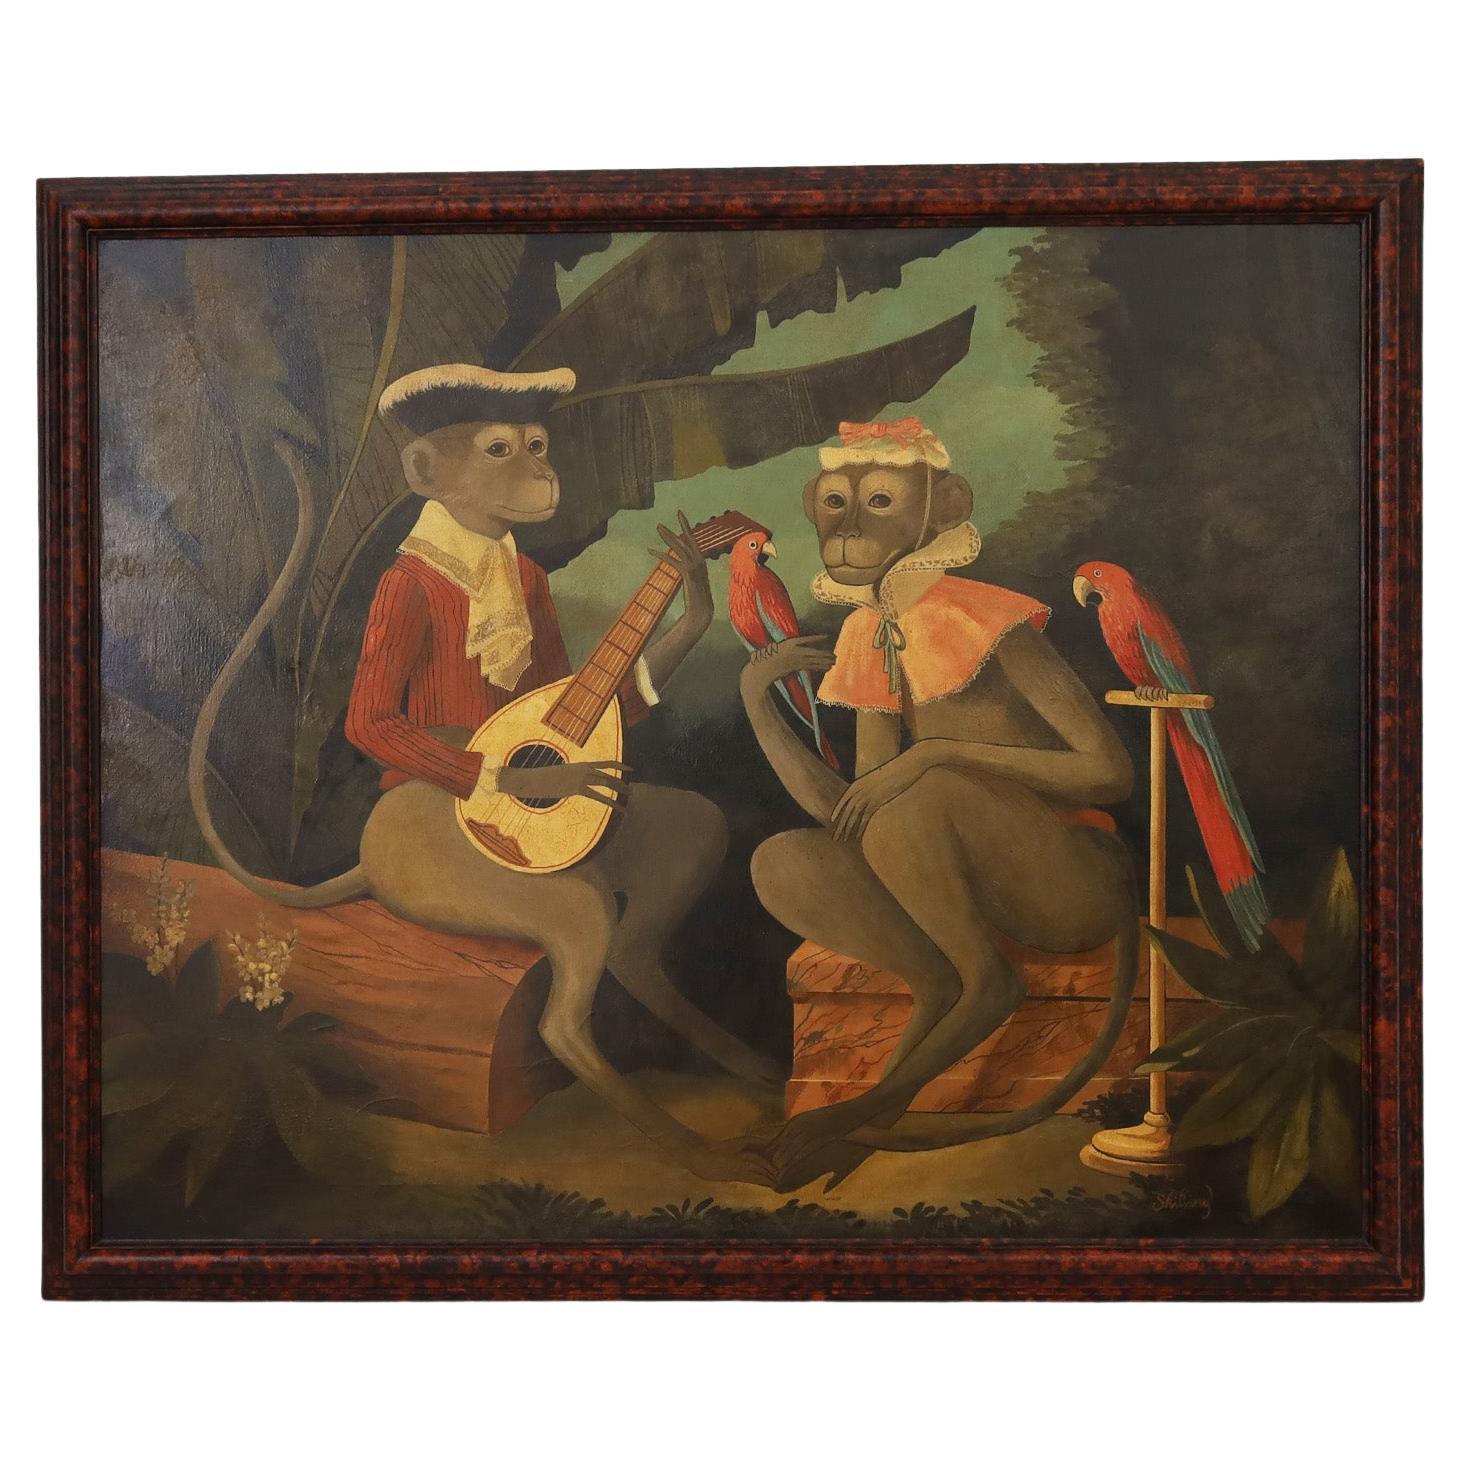 Large Whimsical Oil Painting on Canvas of Monkeys by William Skilling